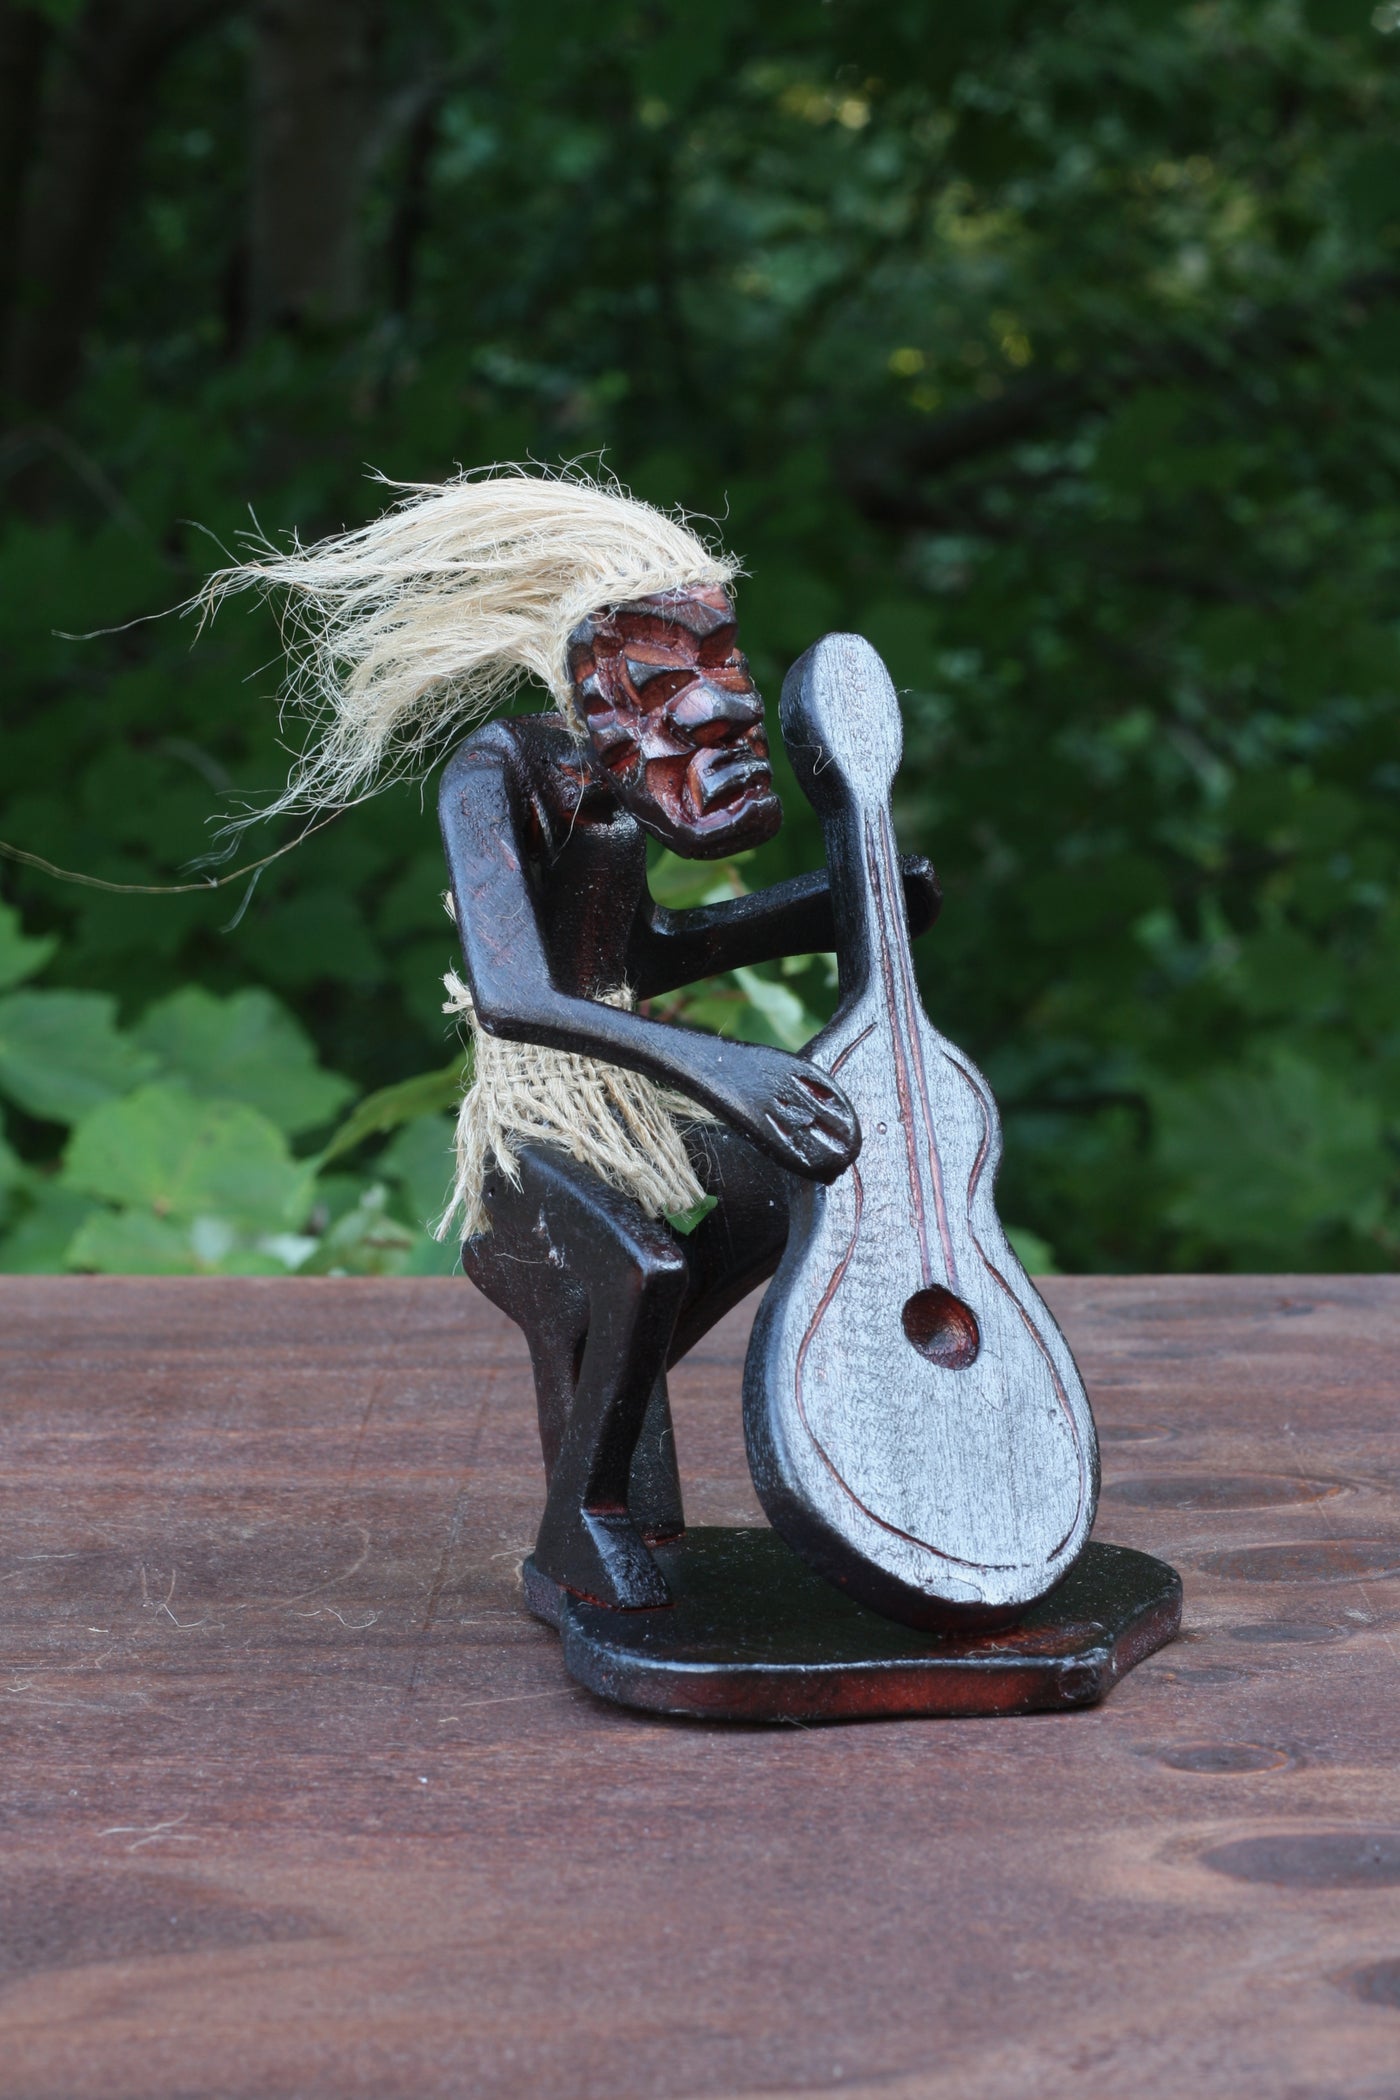 Handmade Wooden Primitive Tribal Cello Dude Figurine Statue Funny Sculpture Tiki Bar Handcrafted Unique Gift Decor Accent Figurine Hand Carved